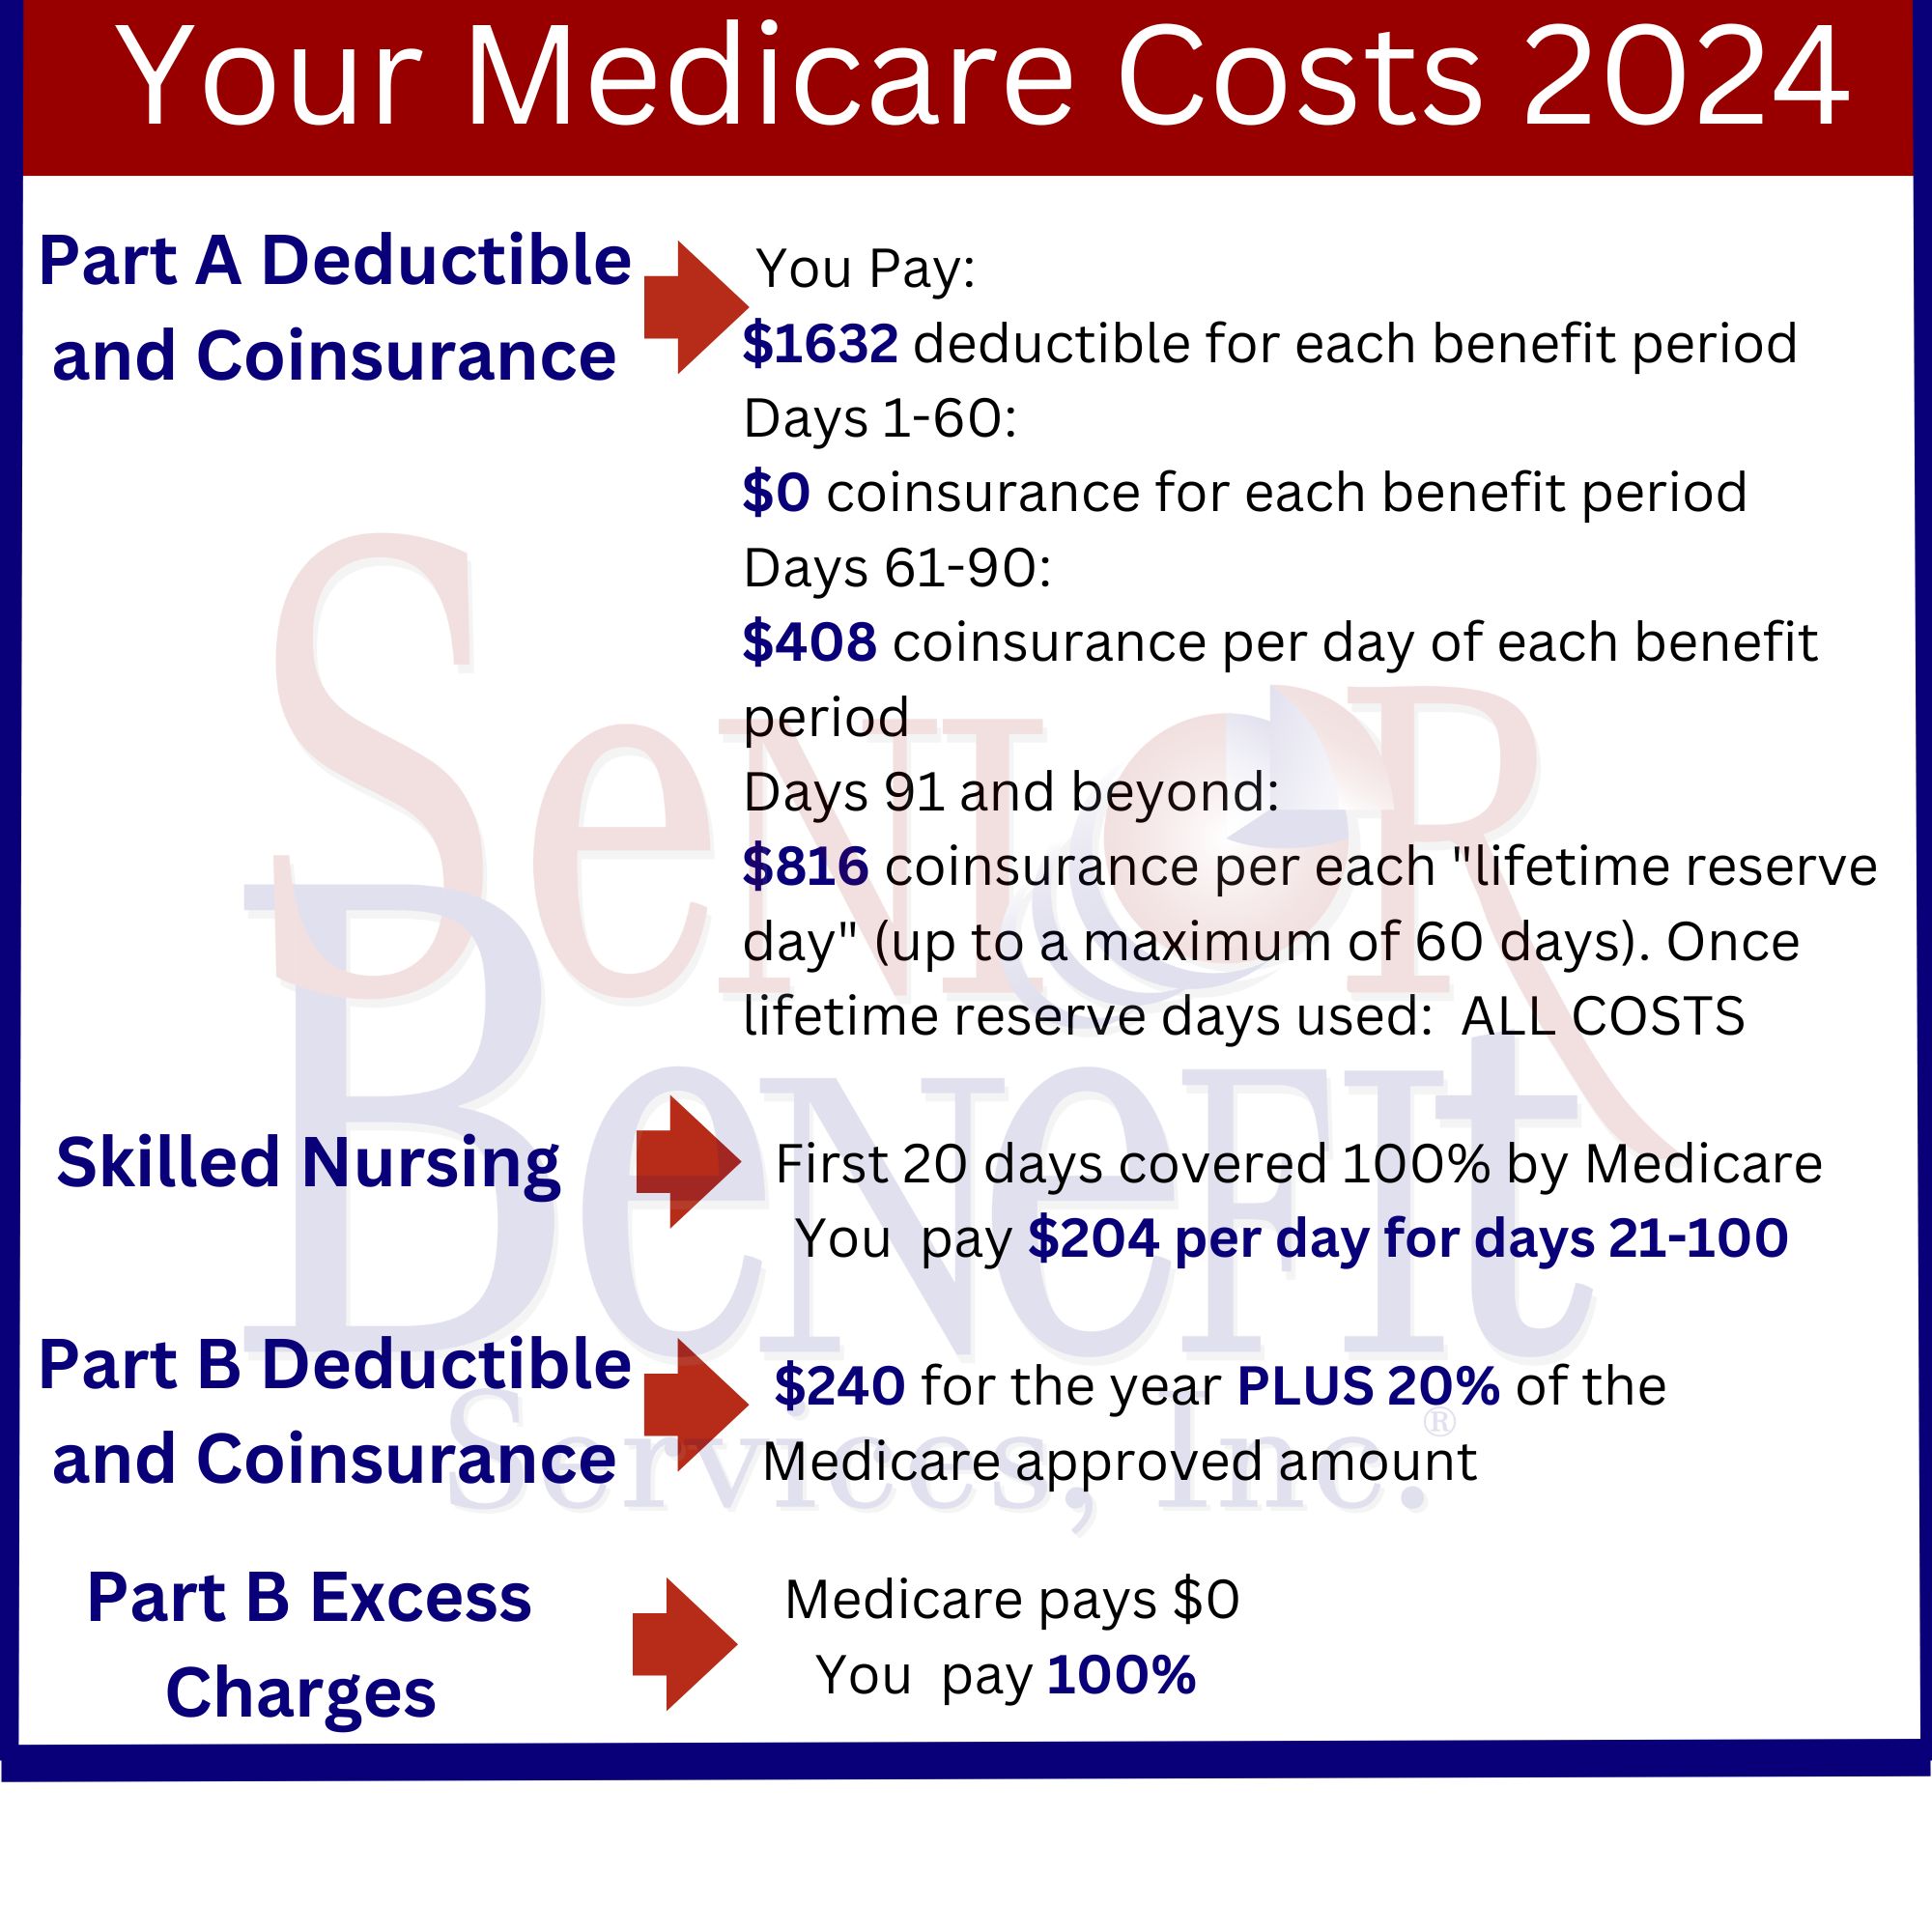 Medicare Costs for 2024